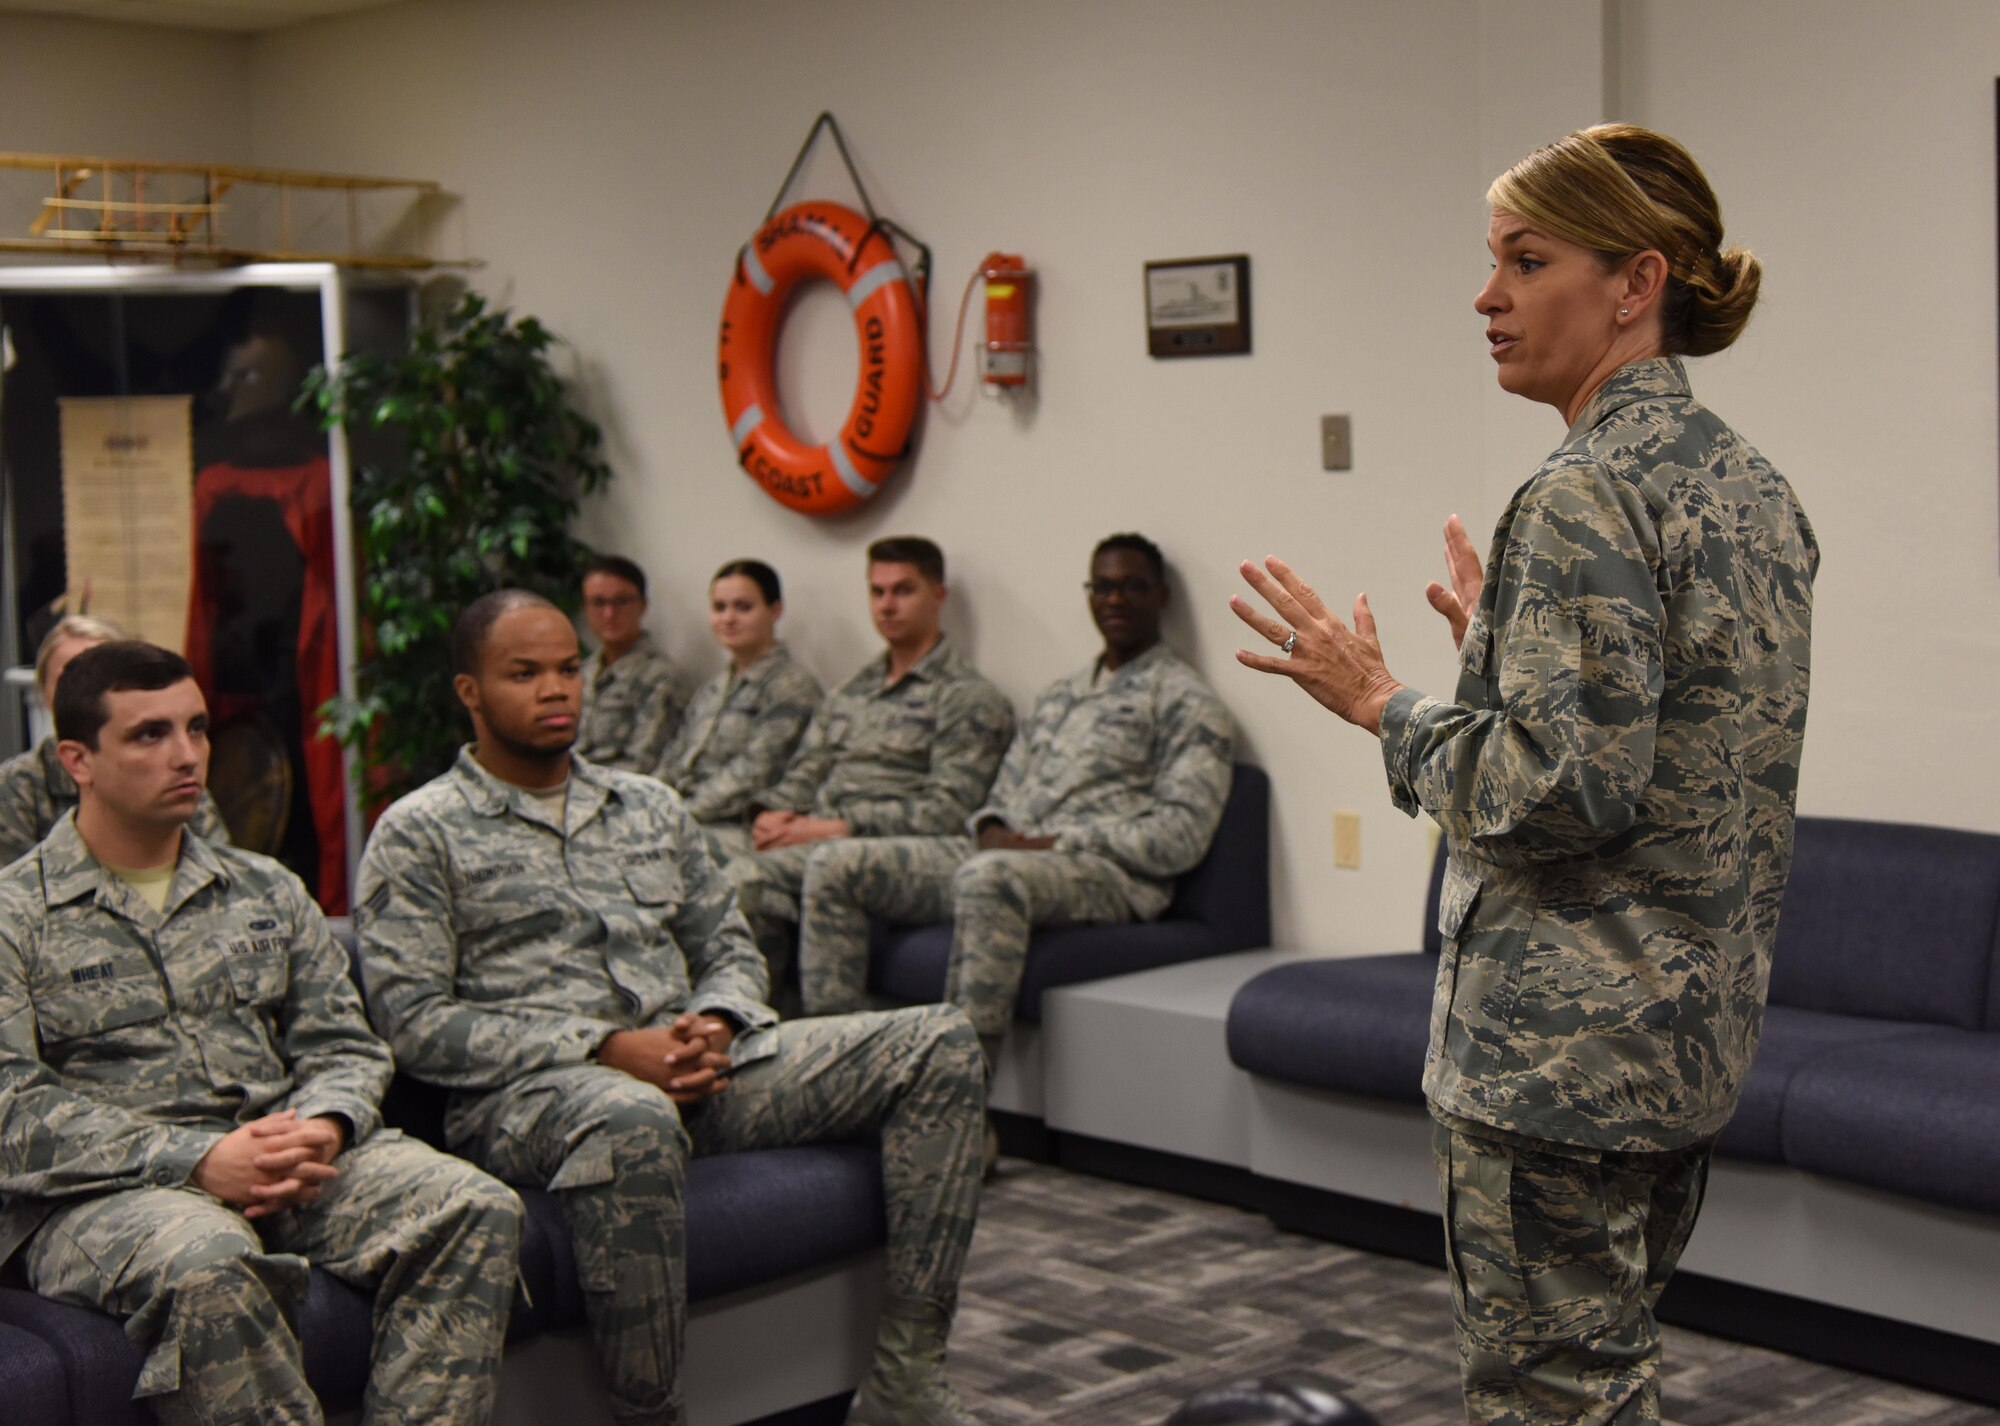 Col. Michele Edmondson, 81st Training Wing commander, briefs Airmen Leadership School students inside the heritage room April 21, 2017, on Keesler Air Force Base, Miss. She visits every ALS class to brief the importance of fulfilling a leadership role. (U.S. Air Force photo by Kemberly Groue)